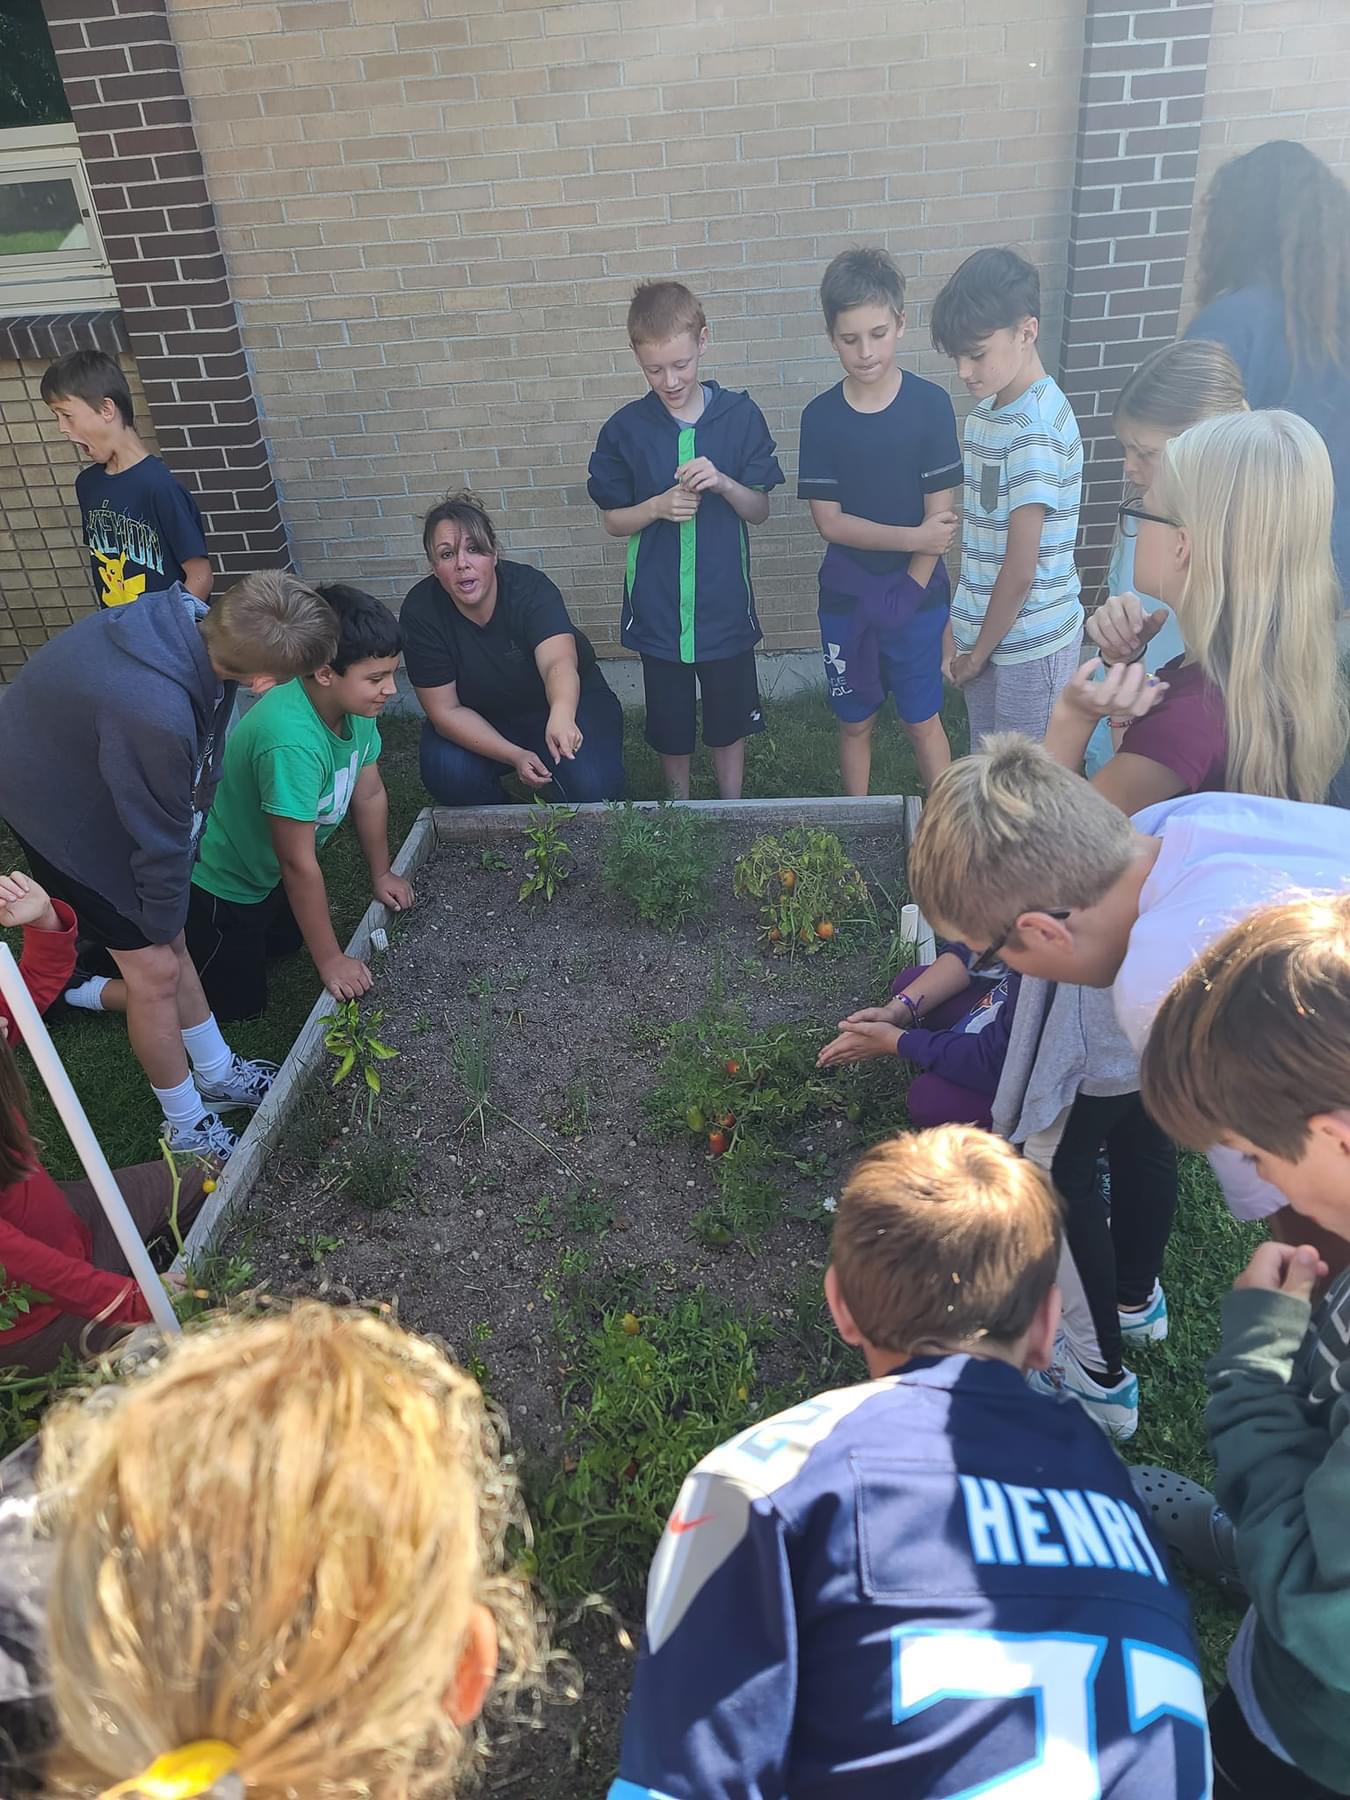 Extension agent, Kellie Kahtani, teaching a 5th grade class at West Elementary about the plants being grown in their school garden during Harvest of the Month.